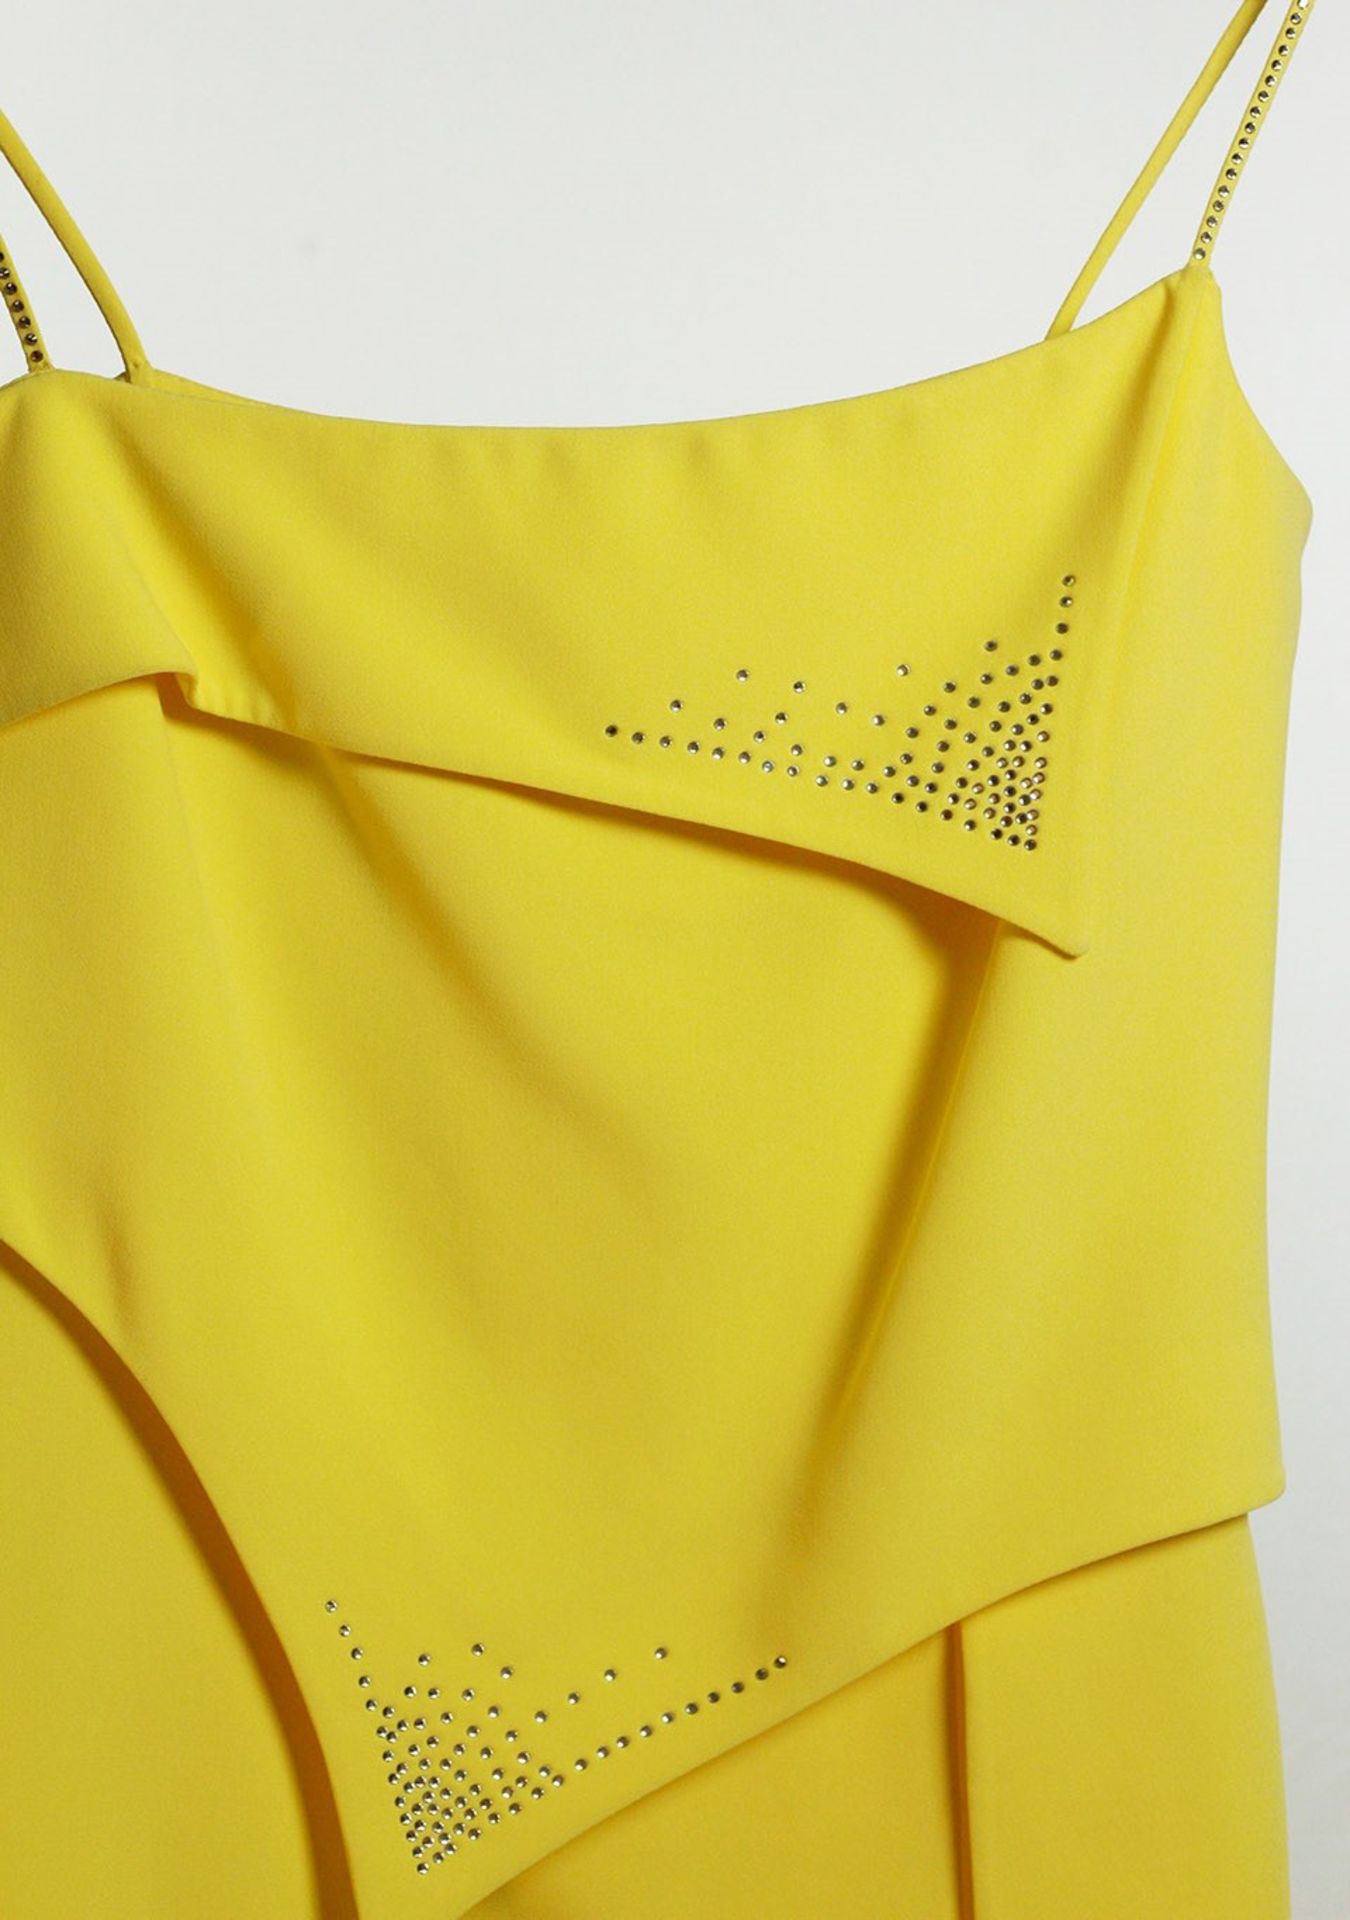 1 x Boutique Le Duc Yellow Dress - Size: 12 - Material: 68% Acetate, 32% Viscose - From a High End - Image 6 of 14